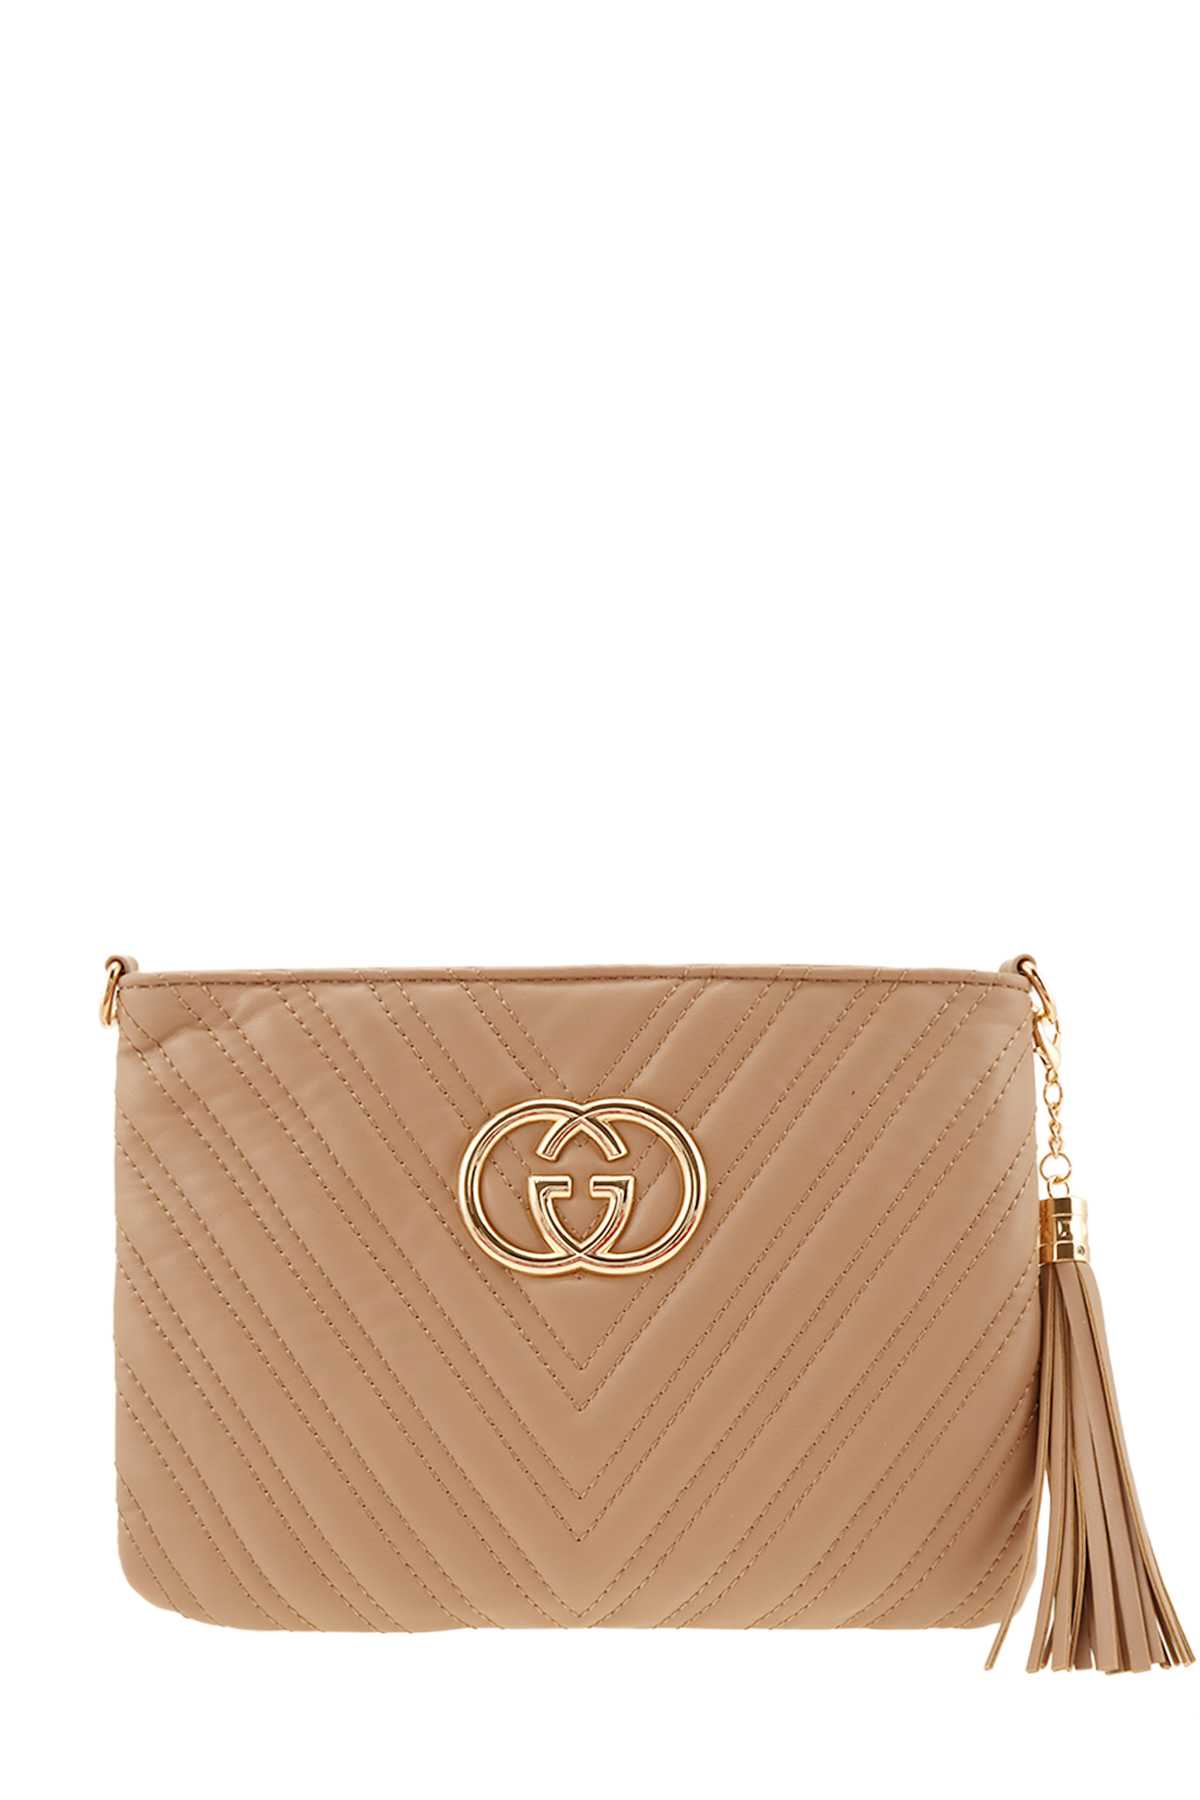 GOLD ACCENT EMBOSSED CLUTCH BAG